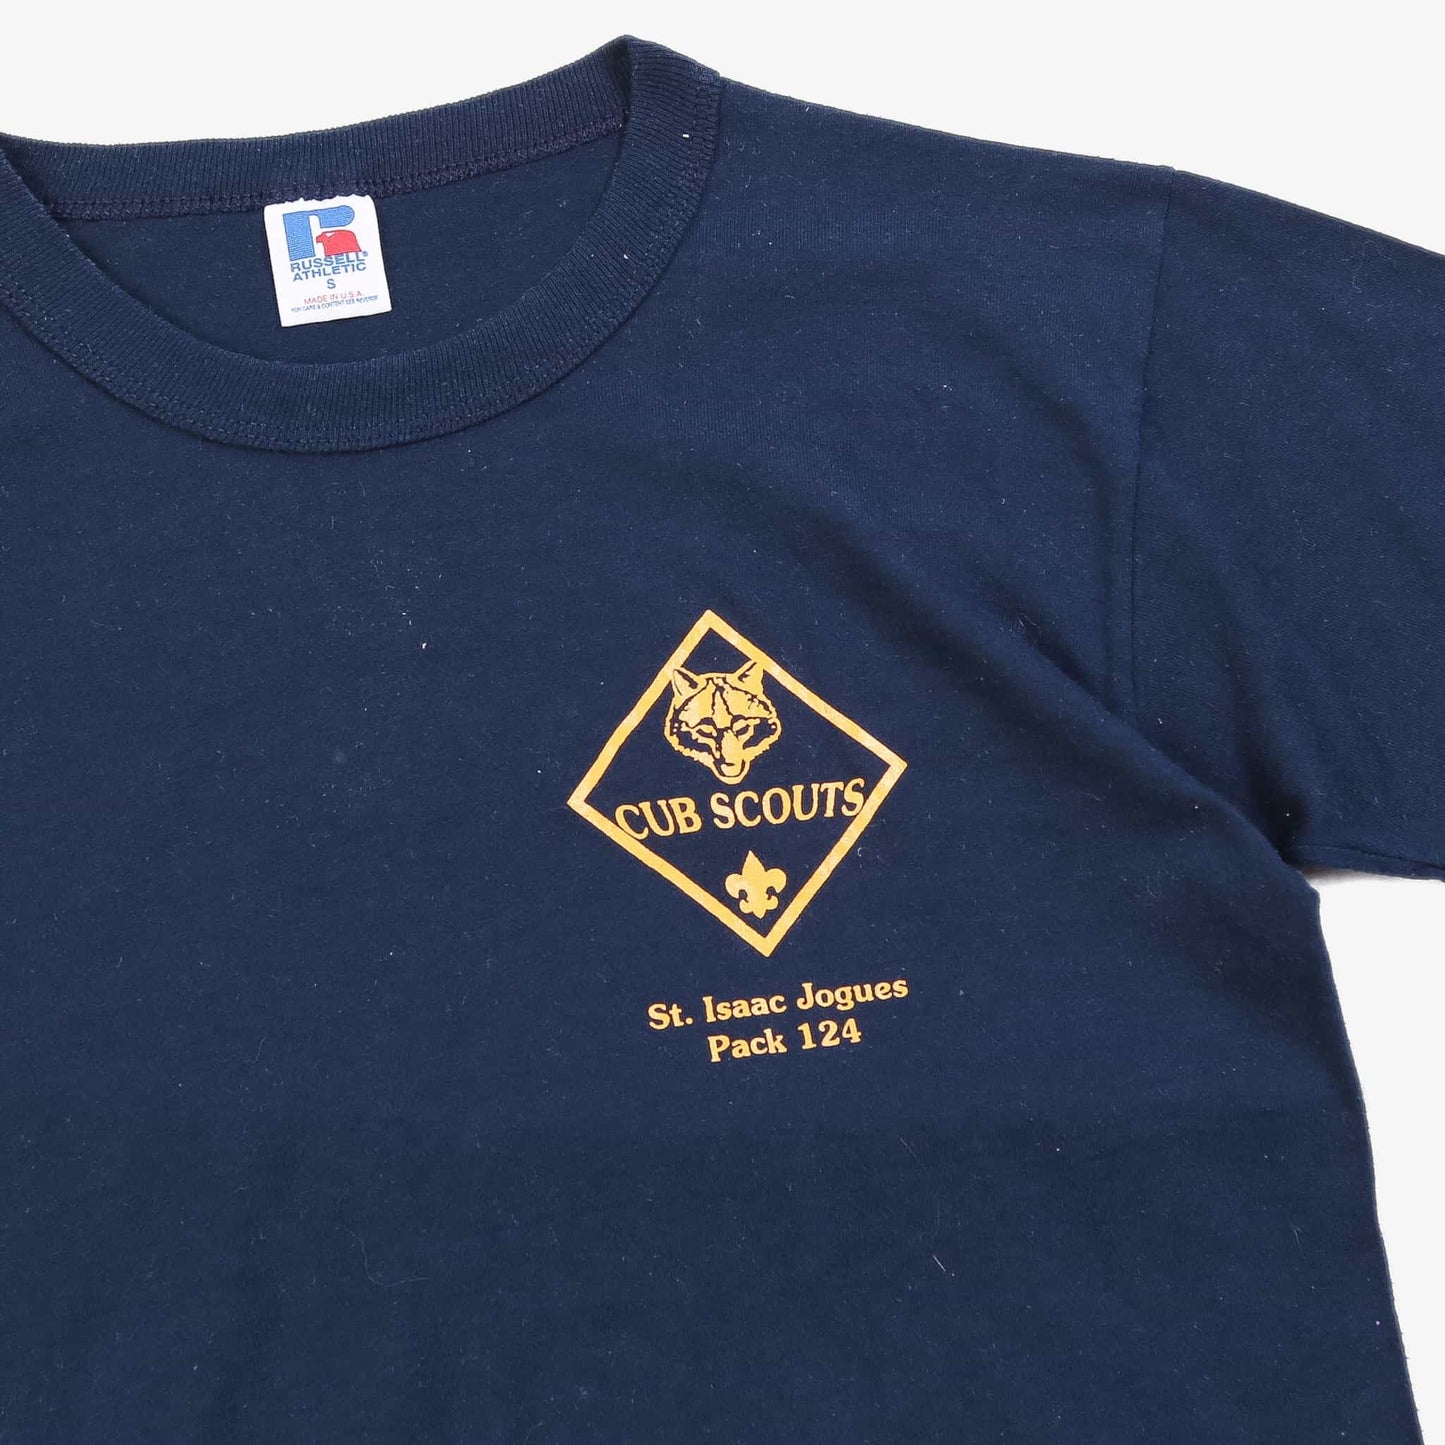 Vintage "Cub Scouts" T-Shirt - American Madness